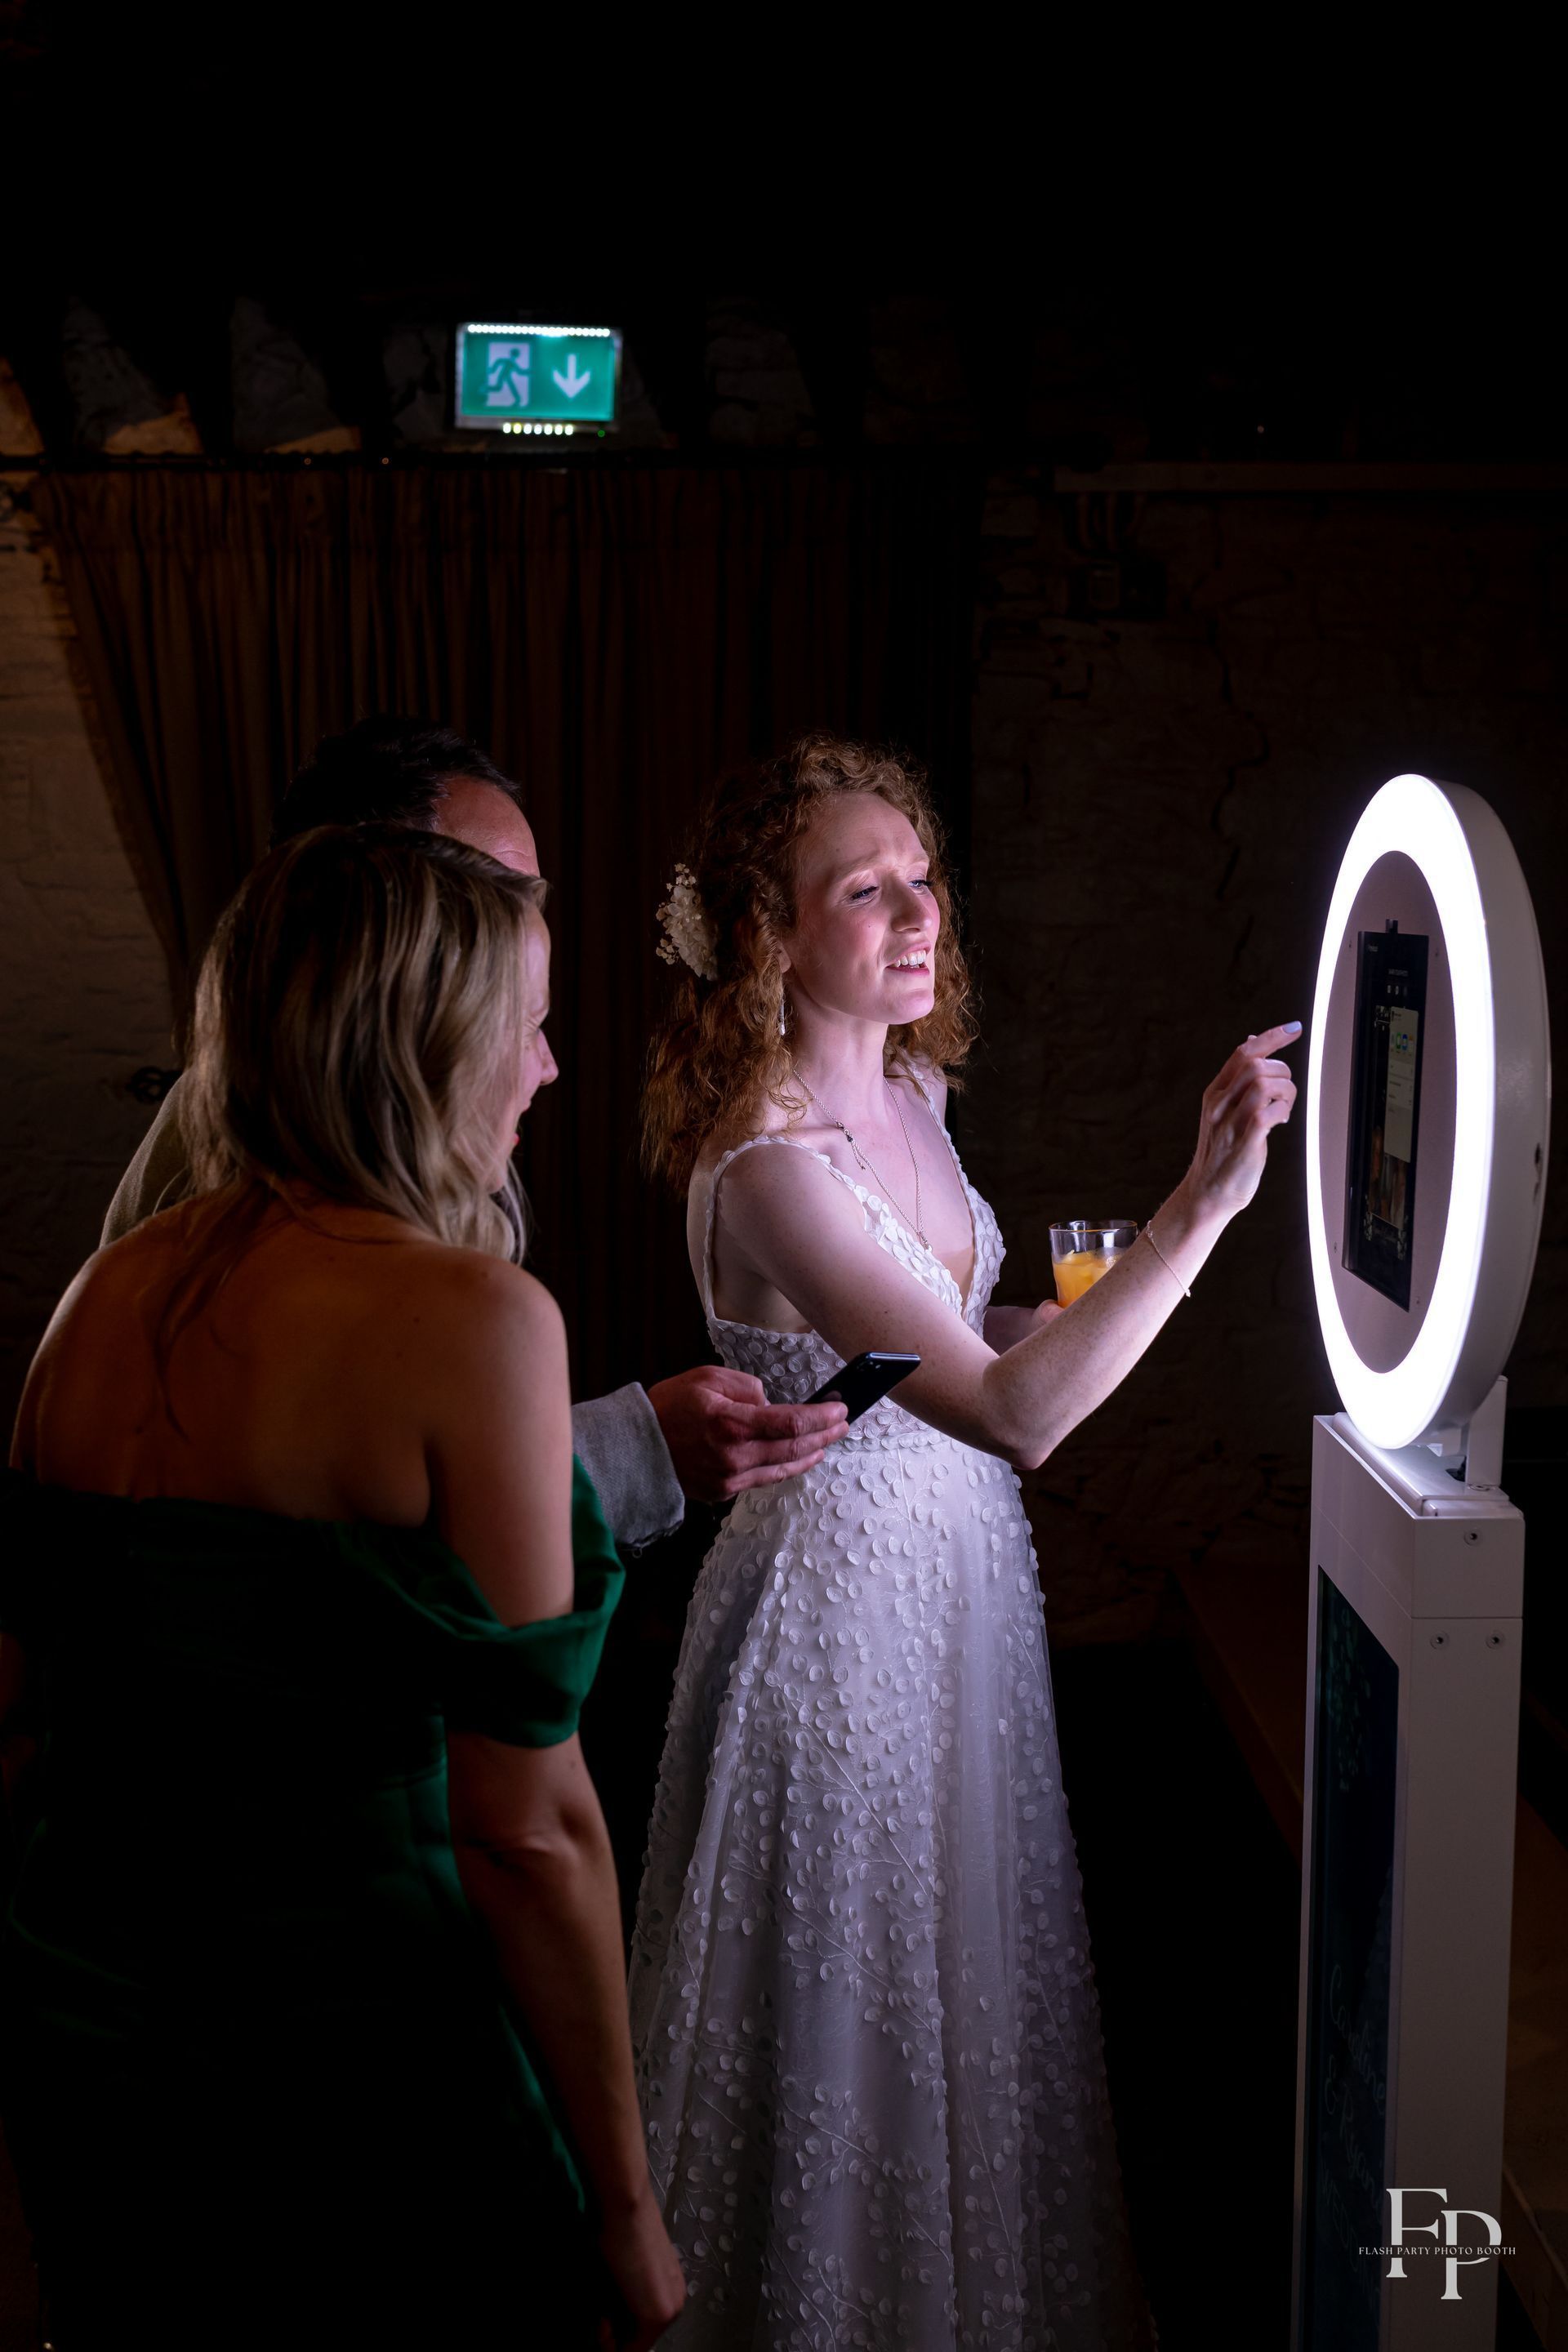 A woman in a white dress looking at a round light of a Selfie Photo Booth.